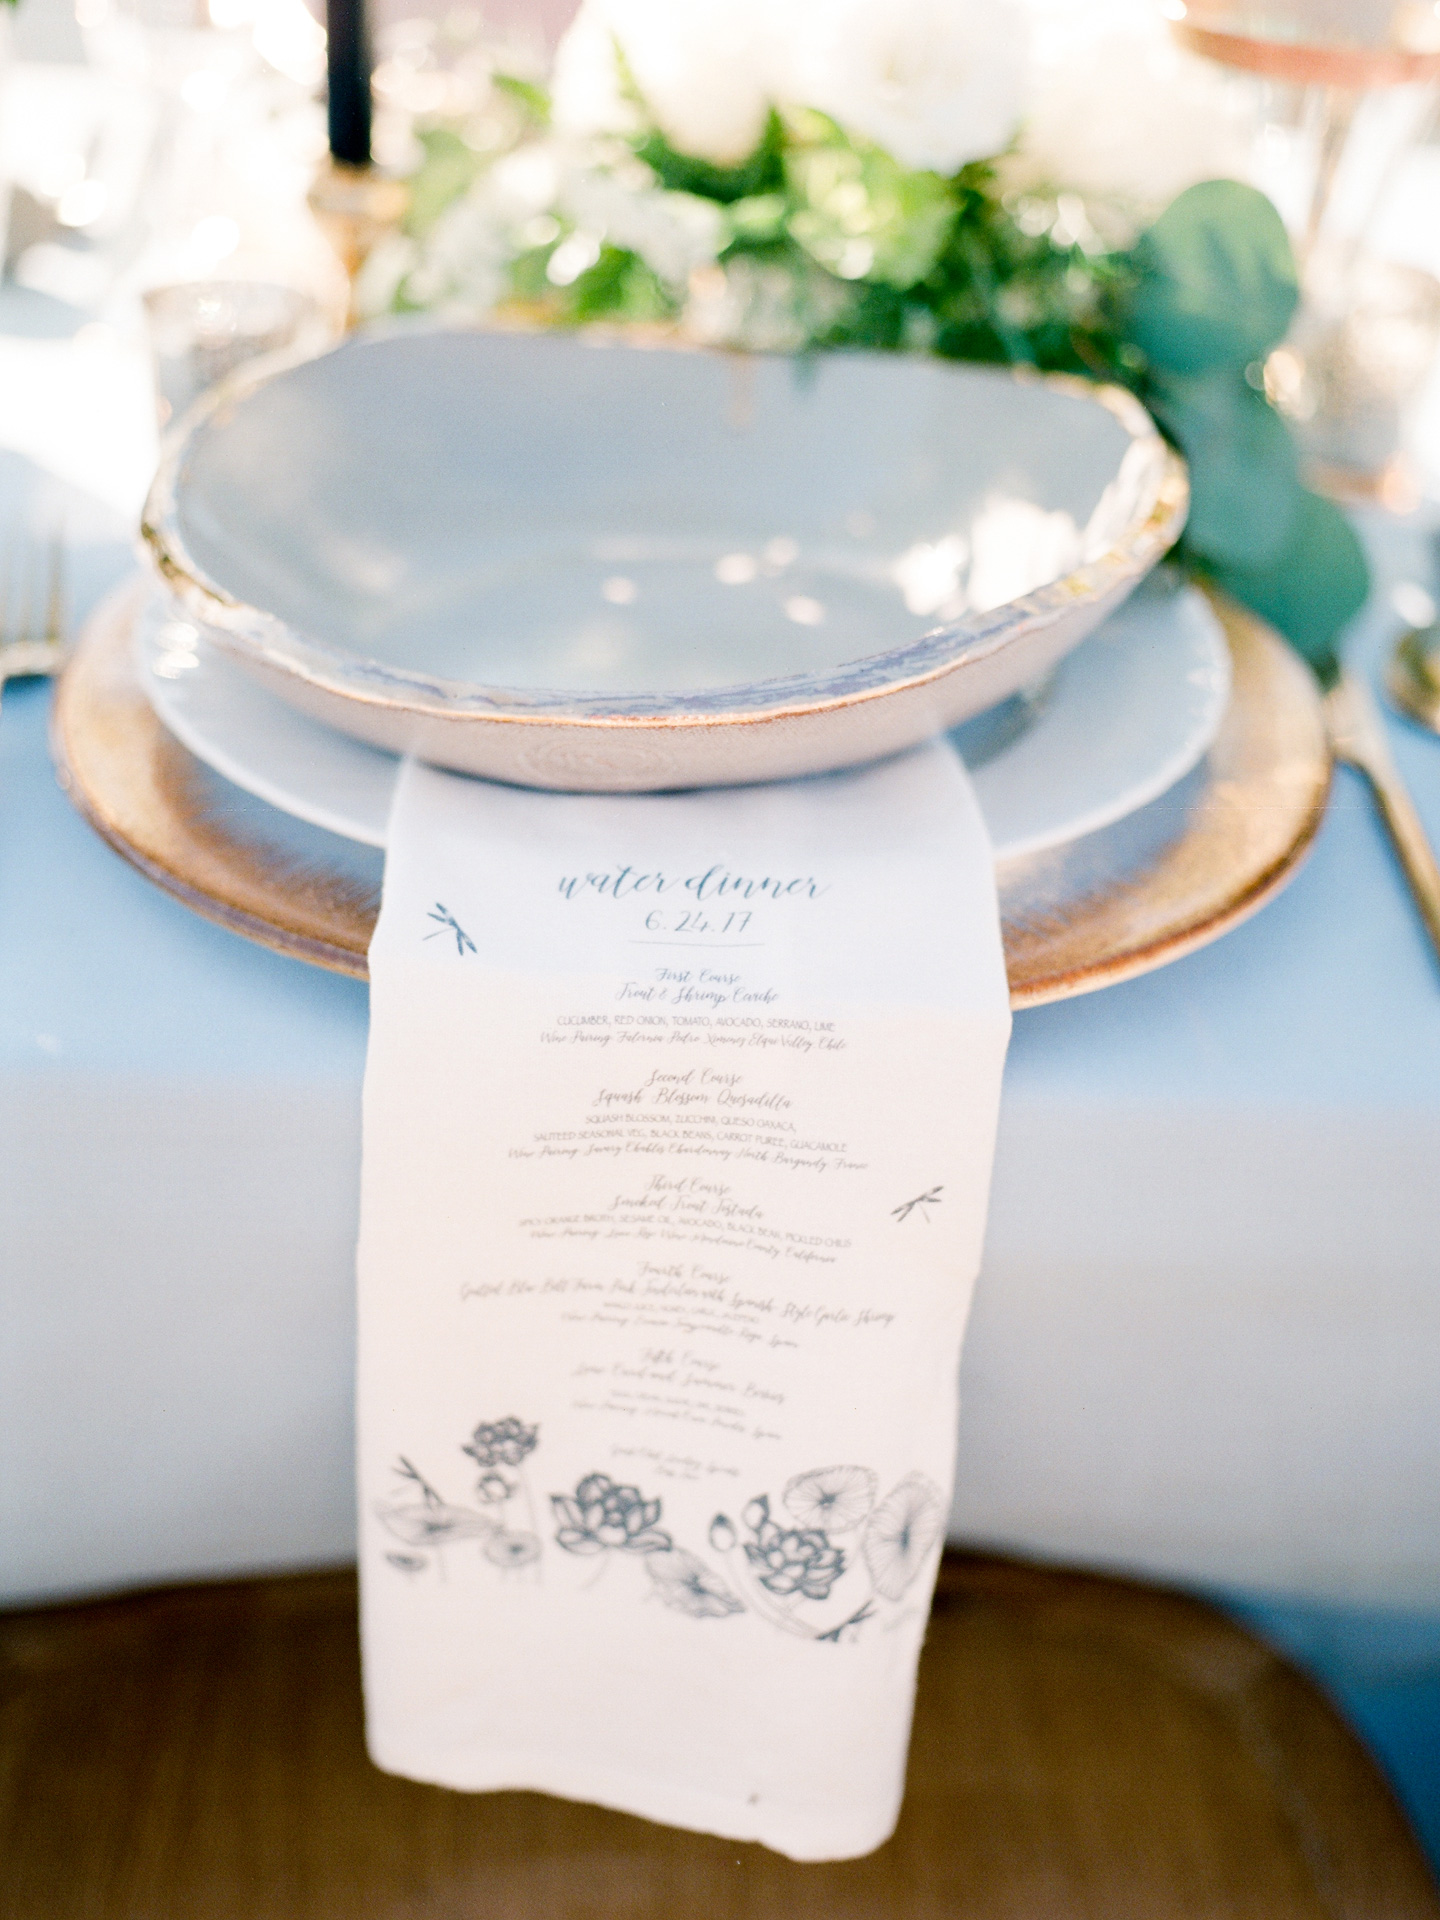 dining table, wedding reception, blue bell farm, a1 party rentals,sugarberry blooms, love tree studios, calligraphy, factured goods, the ink cafe, sugarberry blooms, a1 rentals, pretty little things